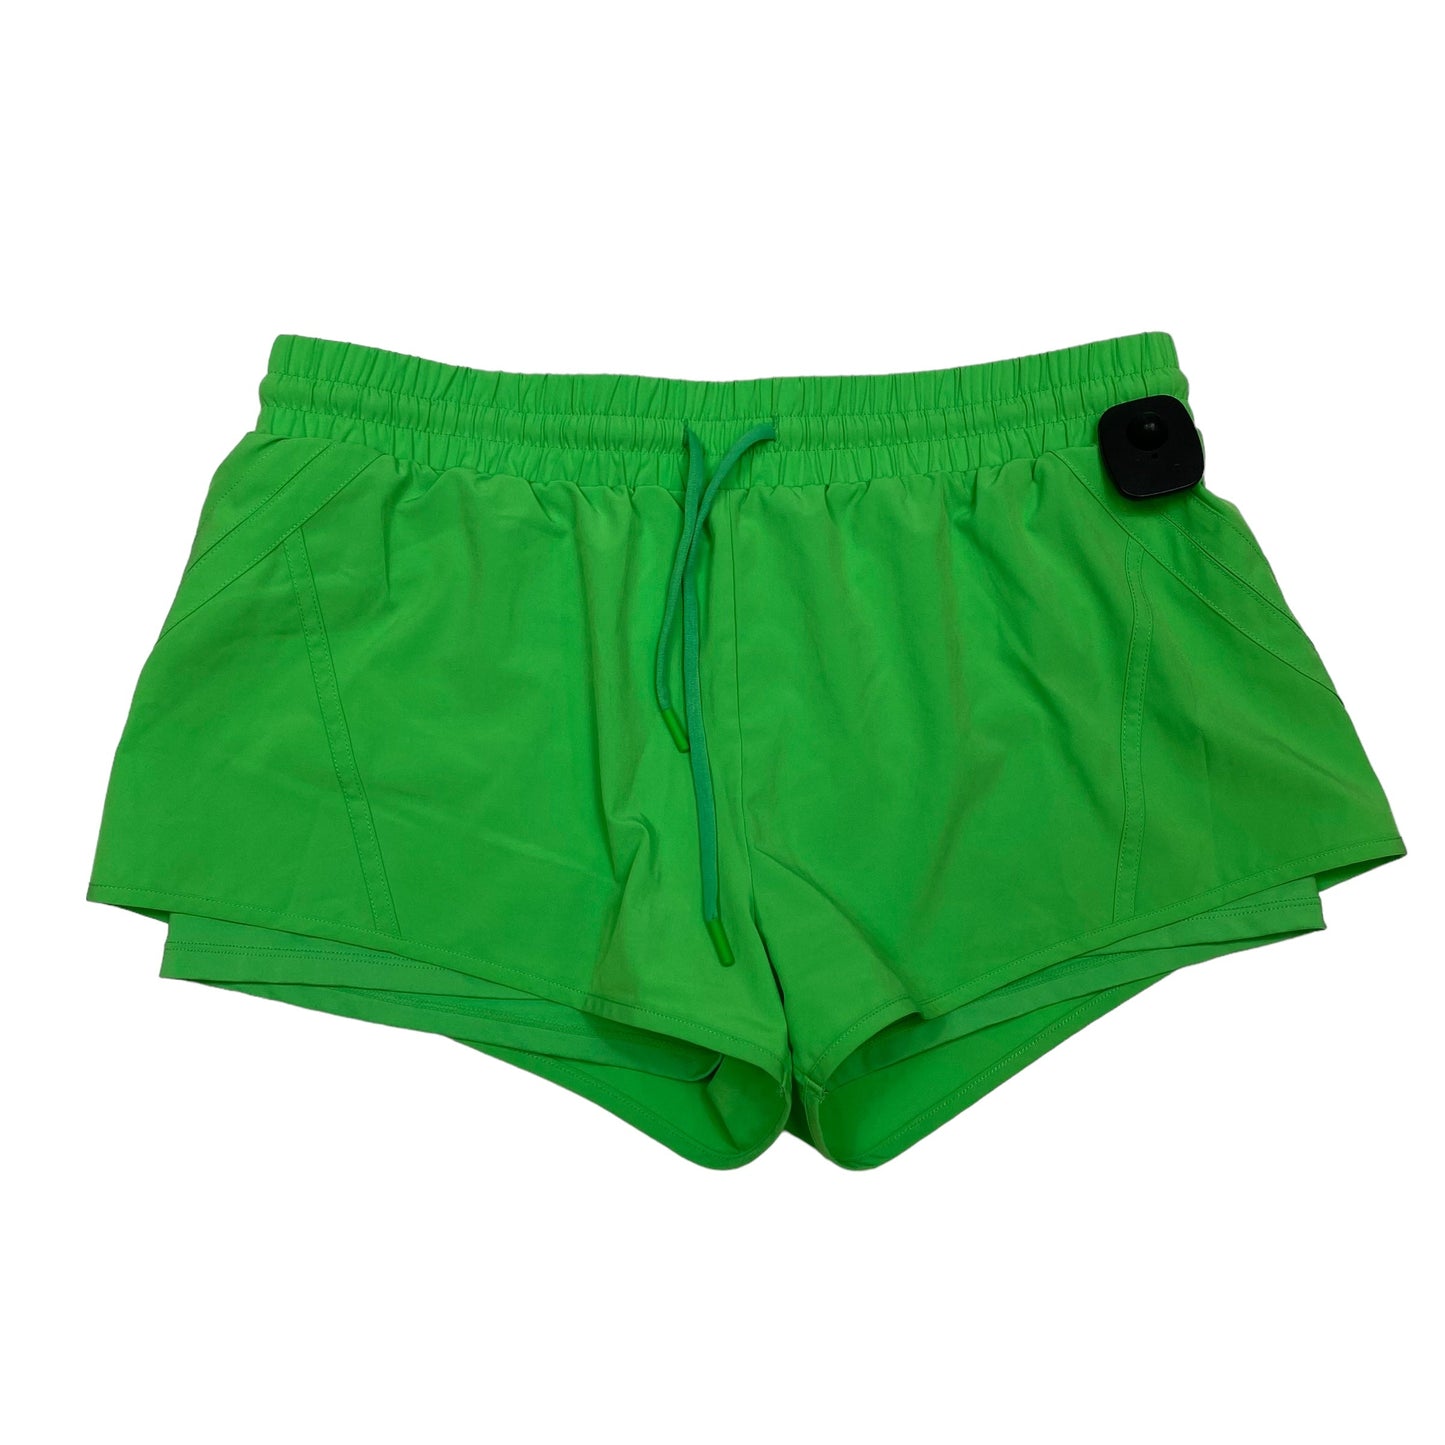 Green Athletic Shorts Zyia, Size L